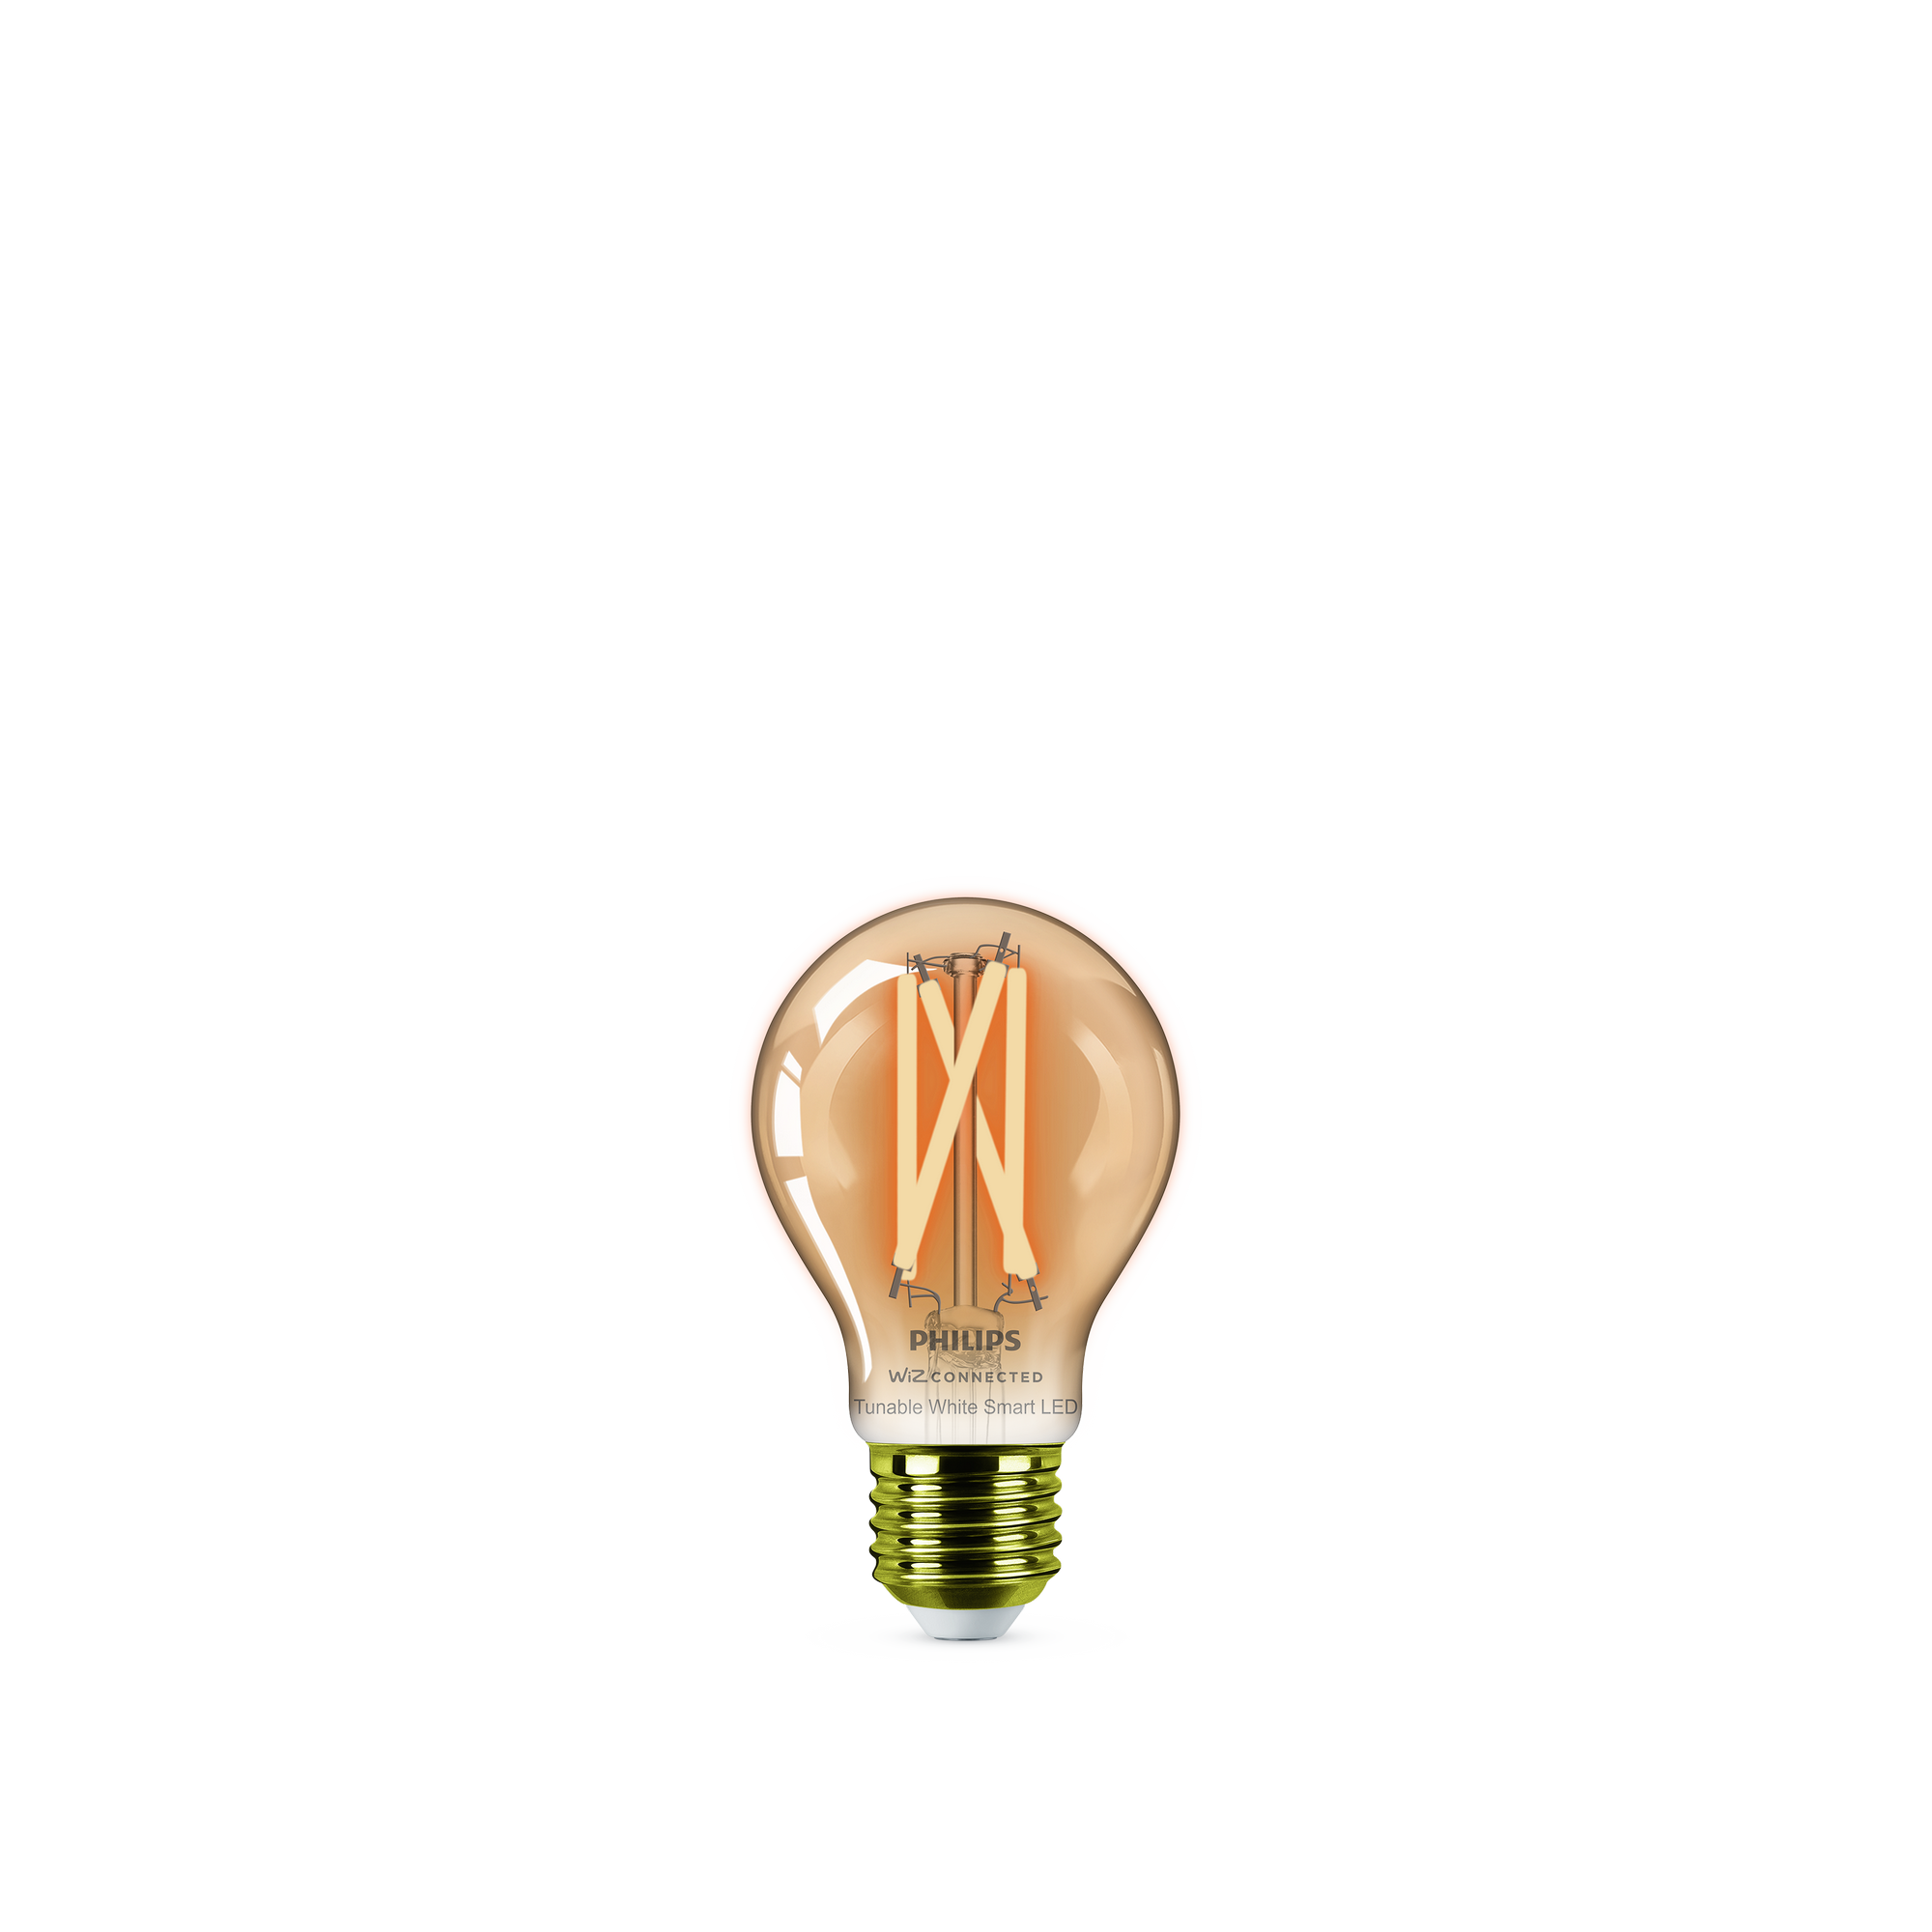 LED-Filament-Lampe 'SmartLED' 640 lm E27 Glühlampe amber + product picture